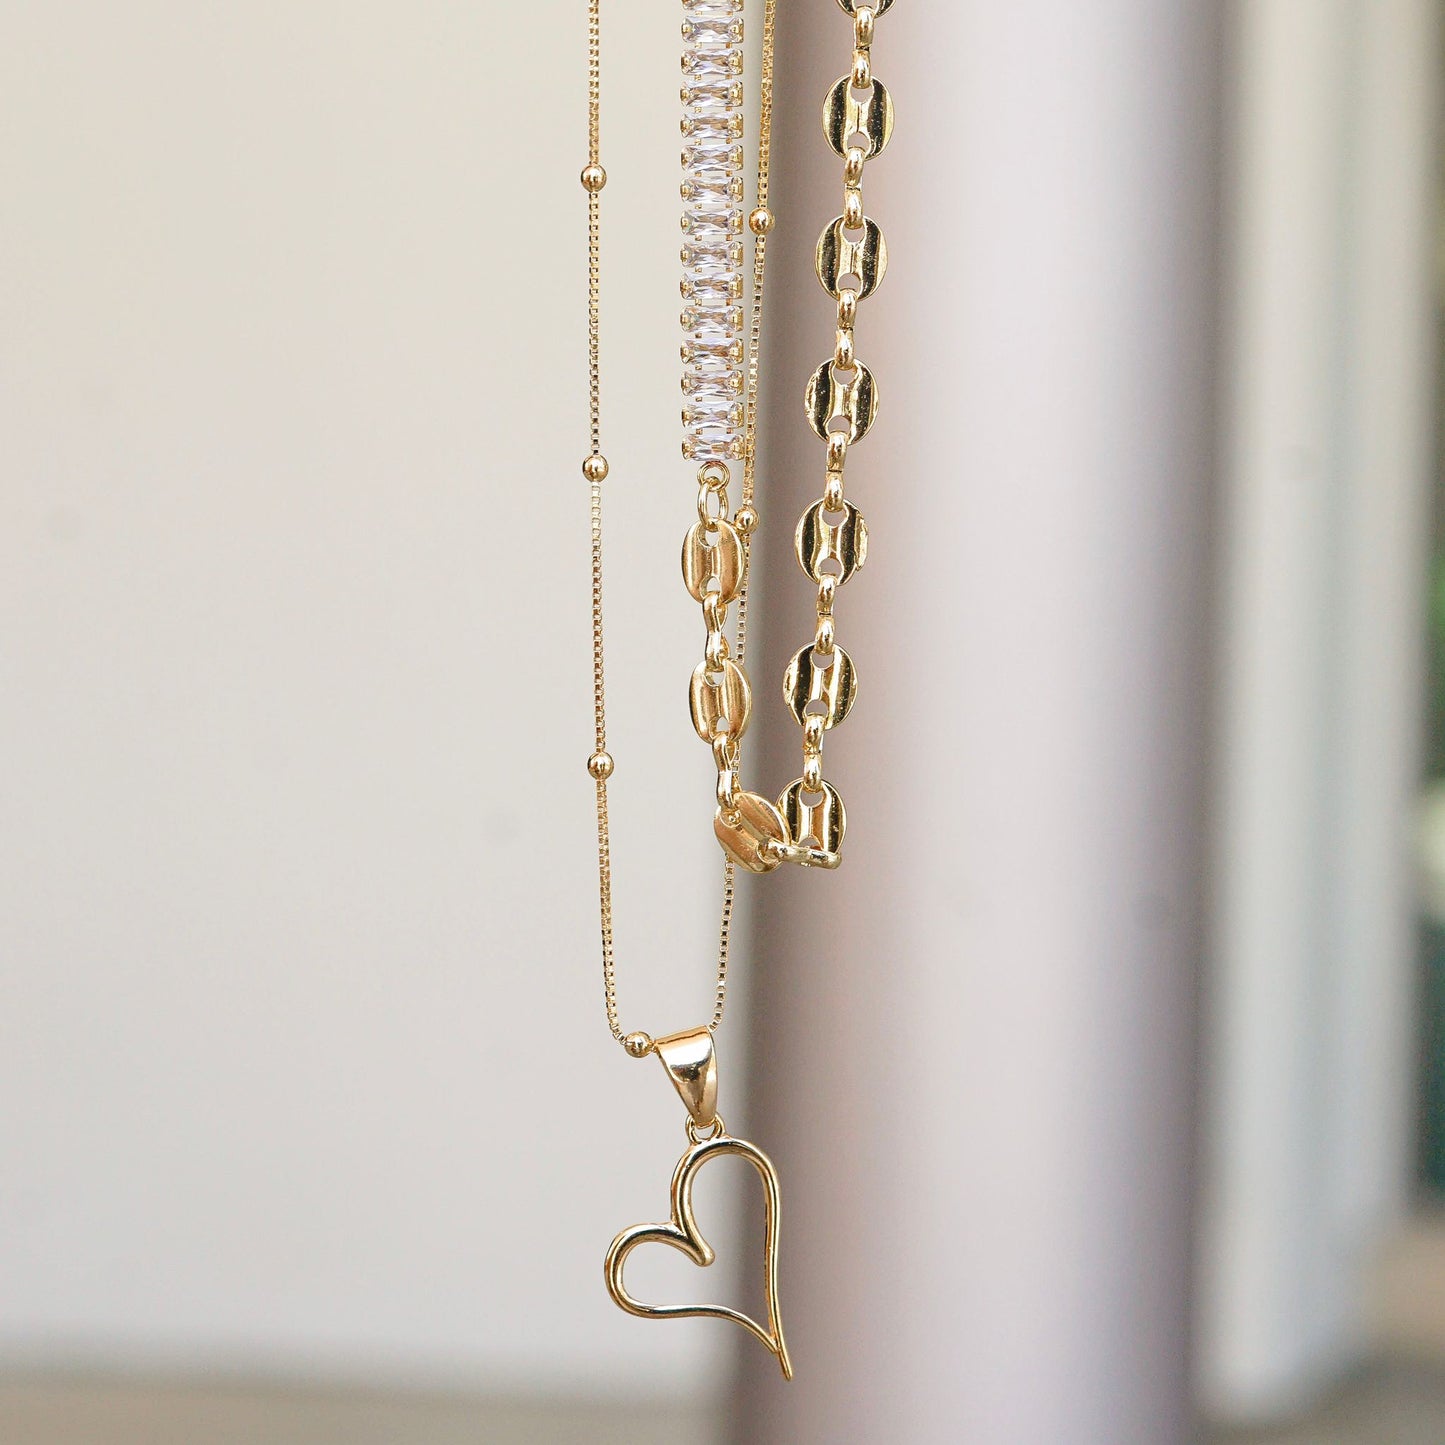 Rita Gold Filled Necklace